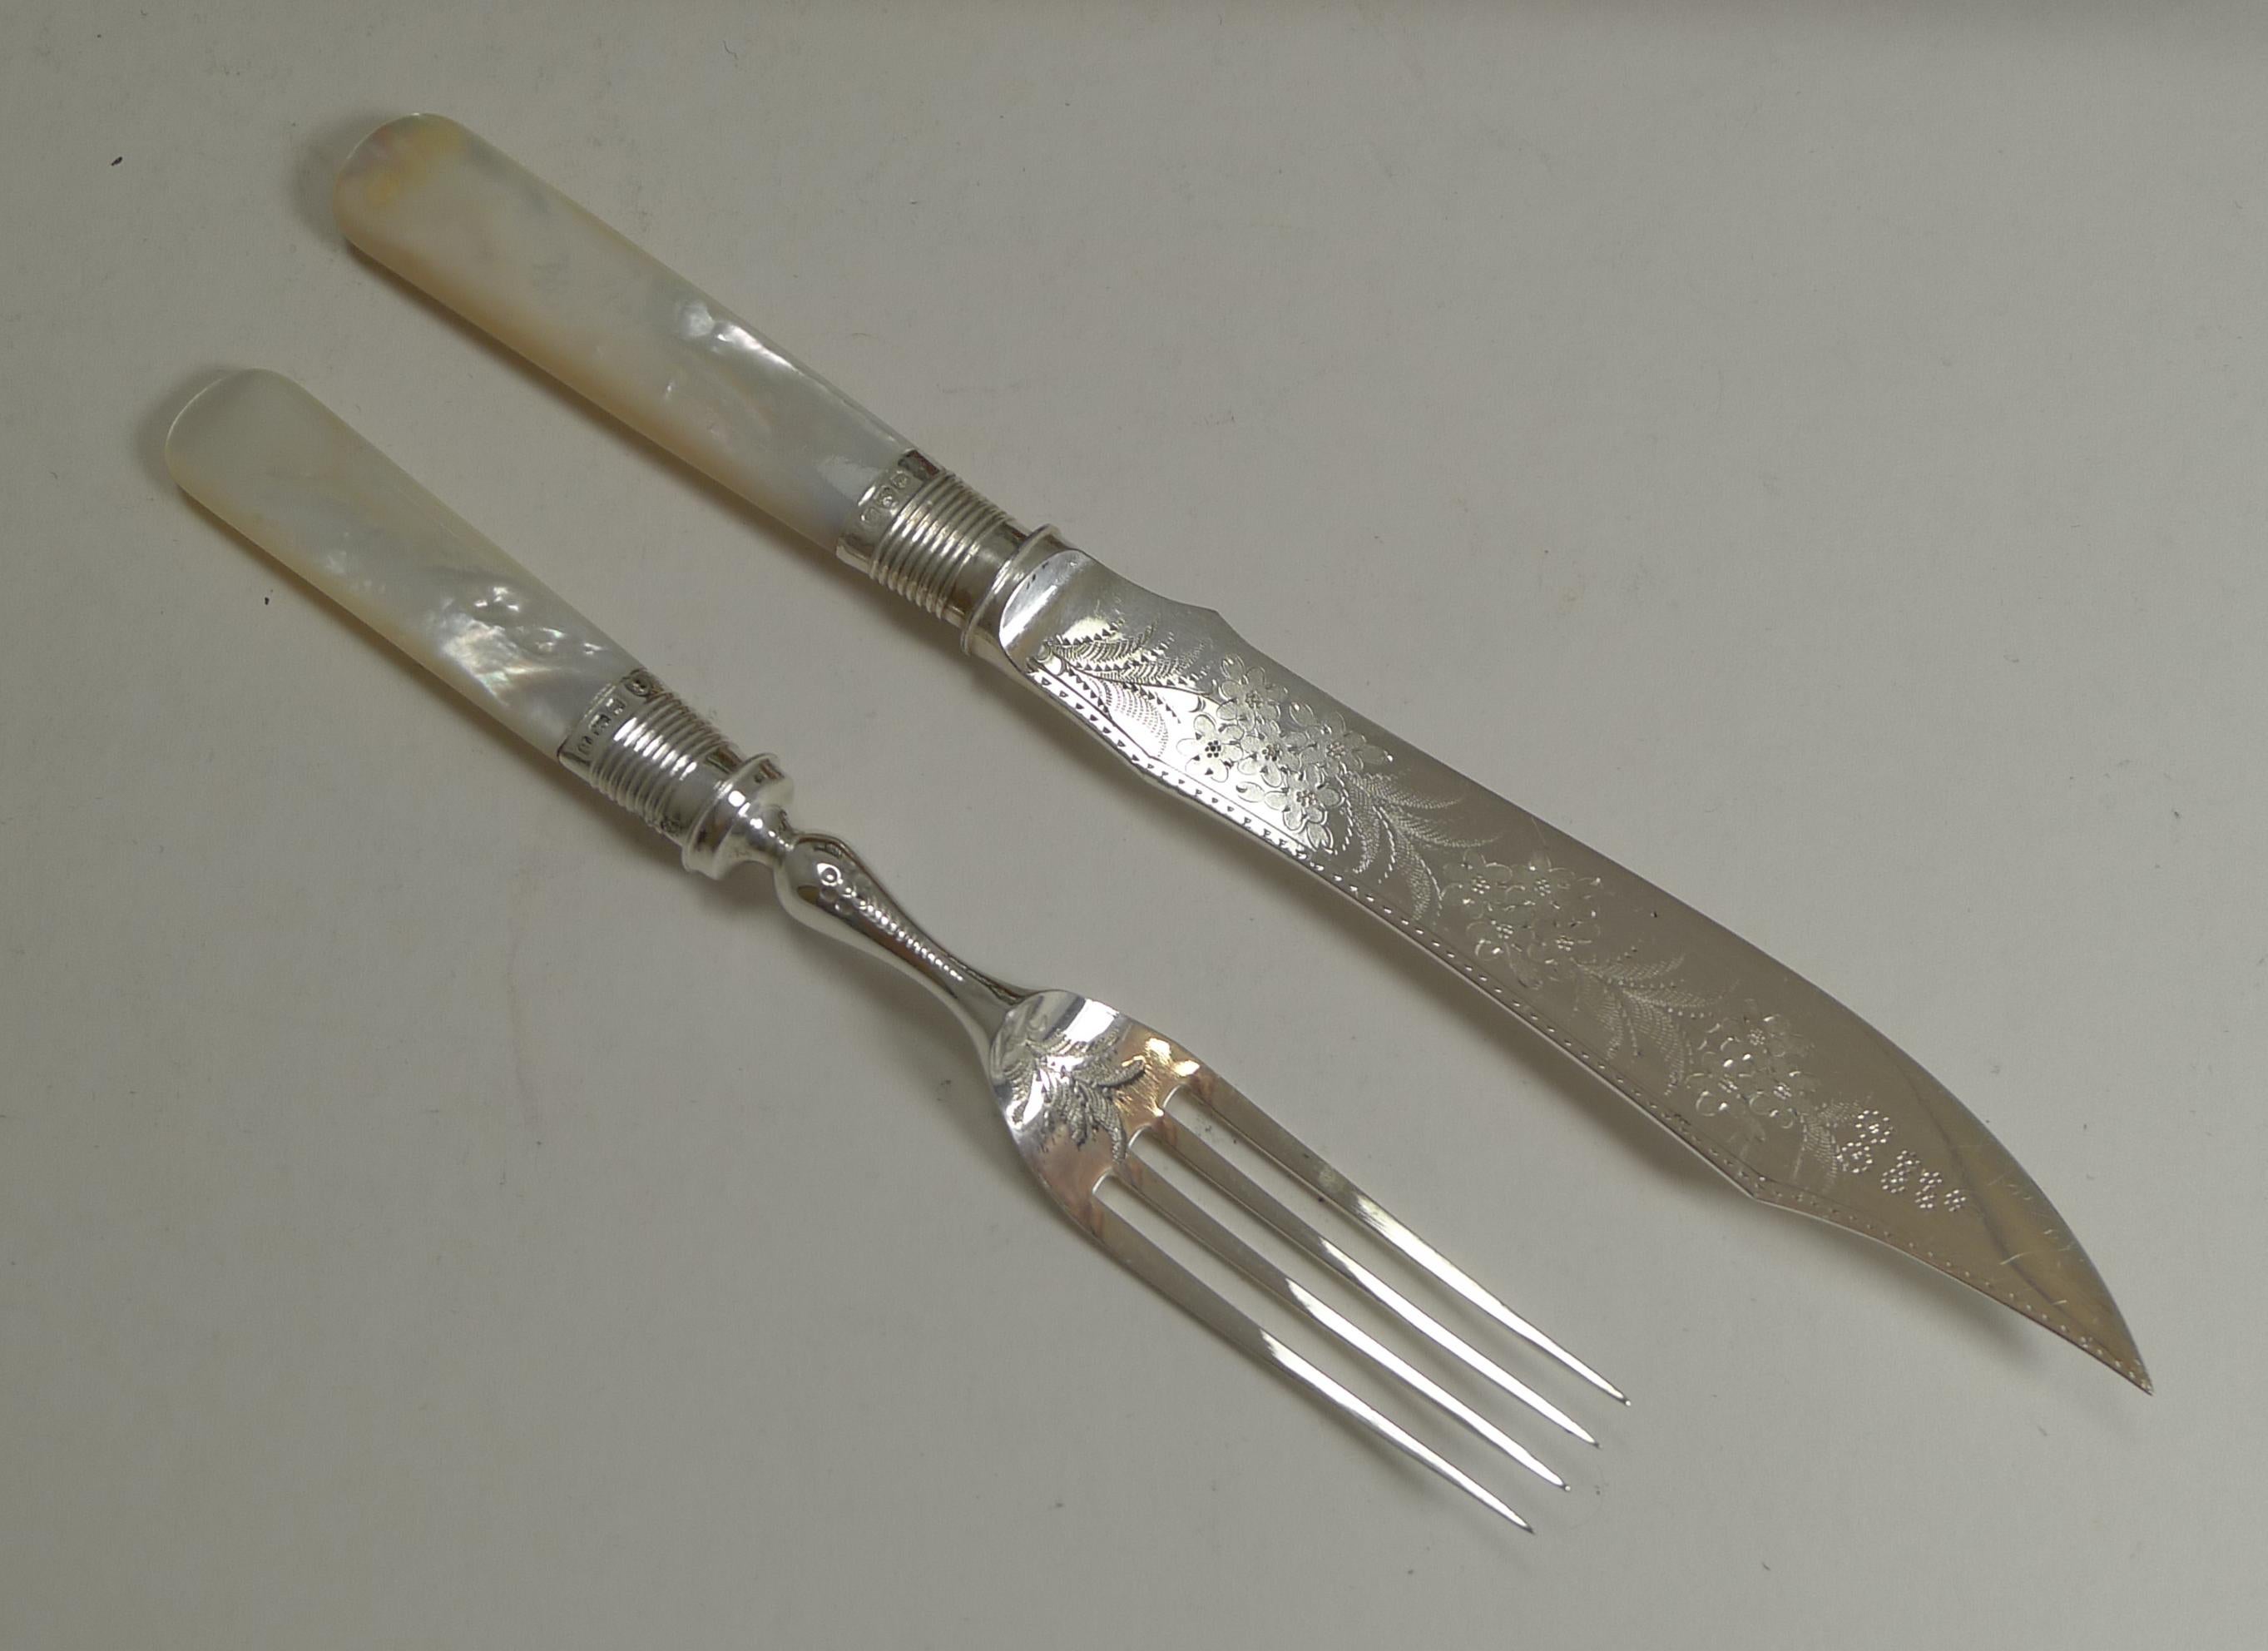 British Set of Antique Mother-of-pearl Handled Fruit Knives and Forks, Sterling Ferrules